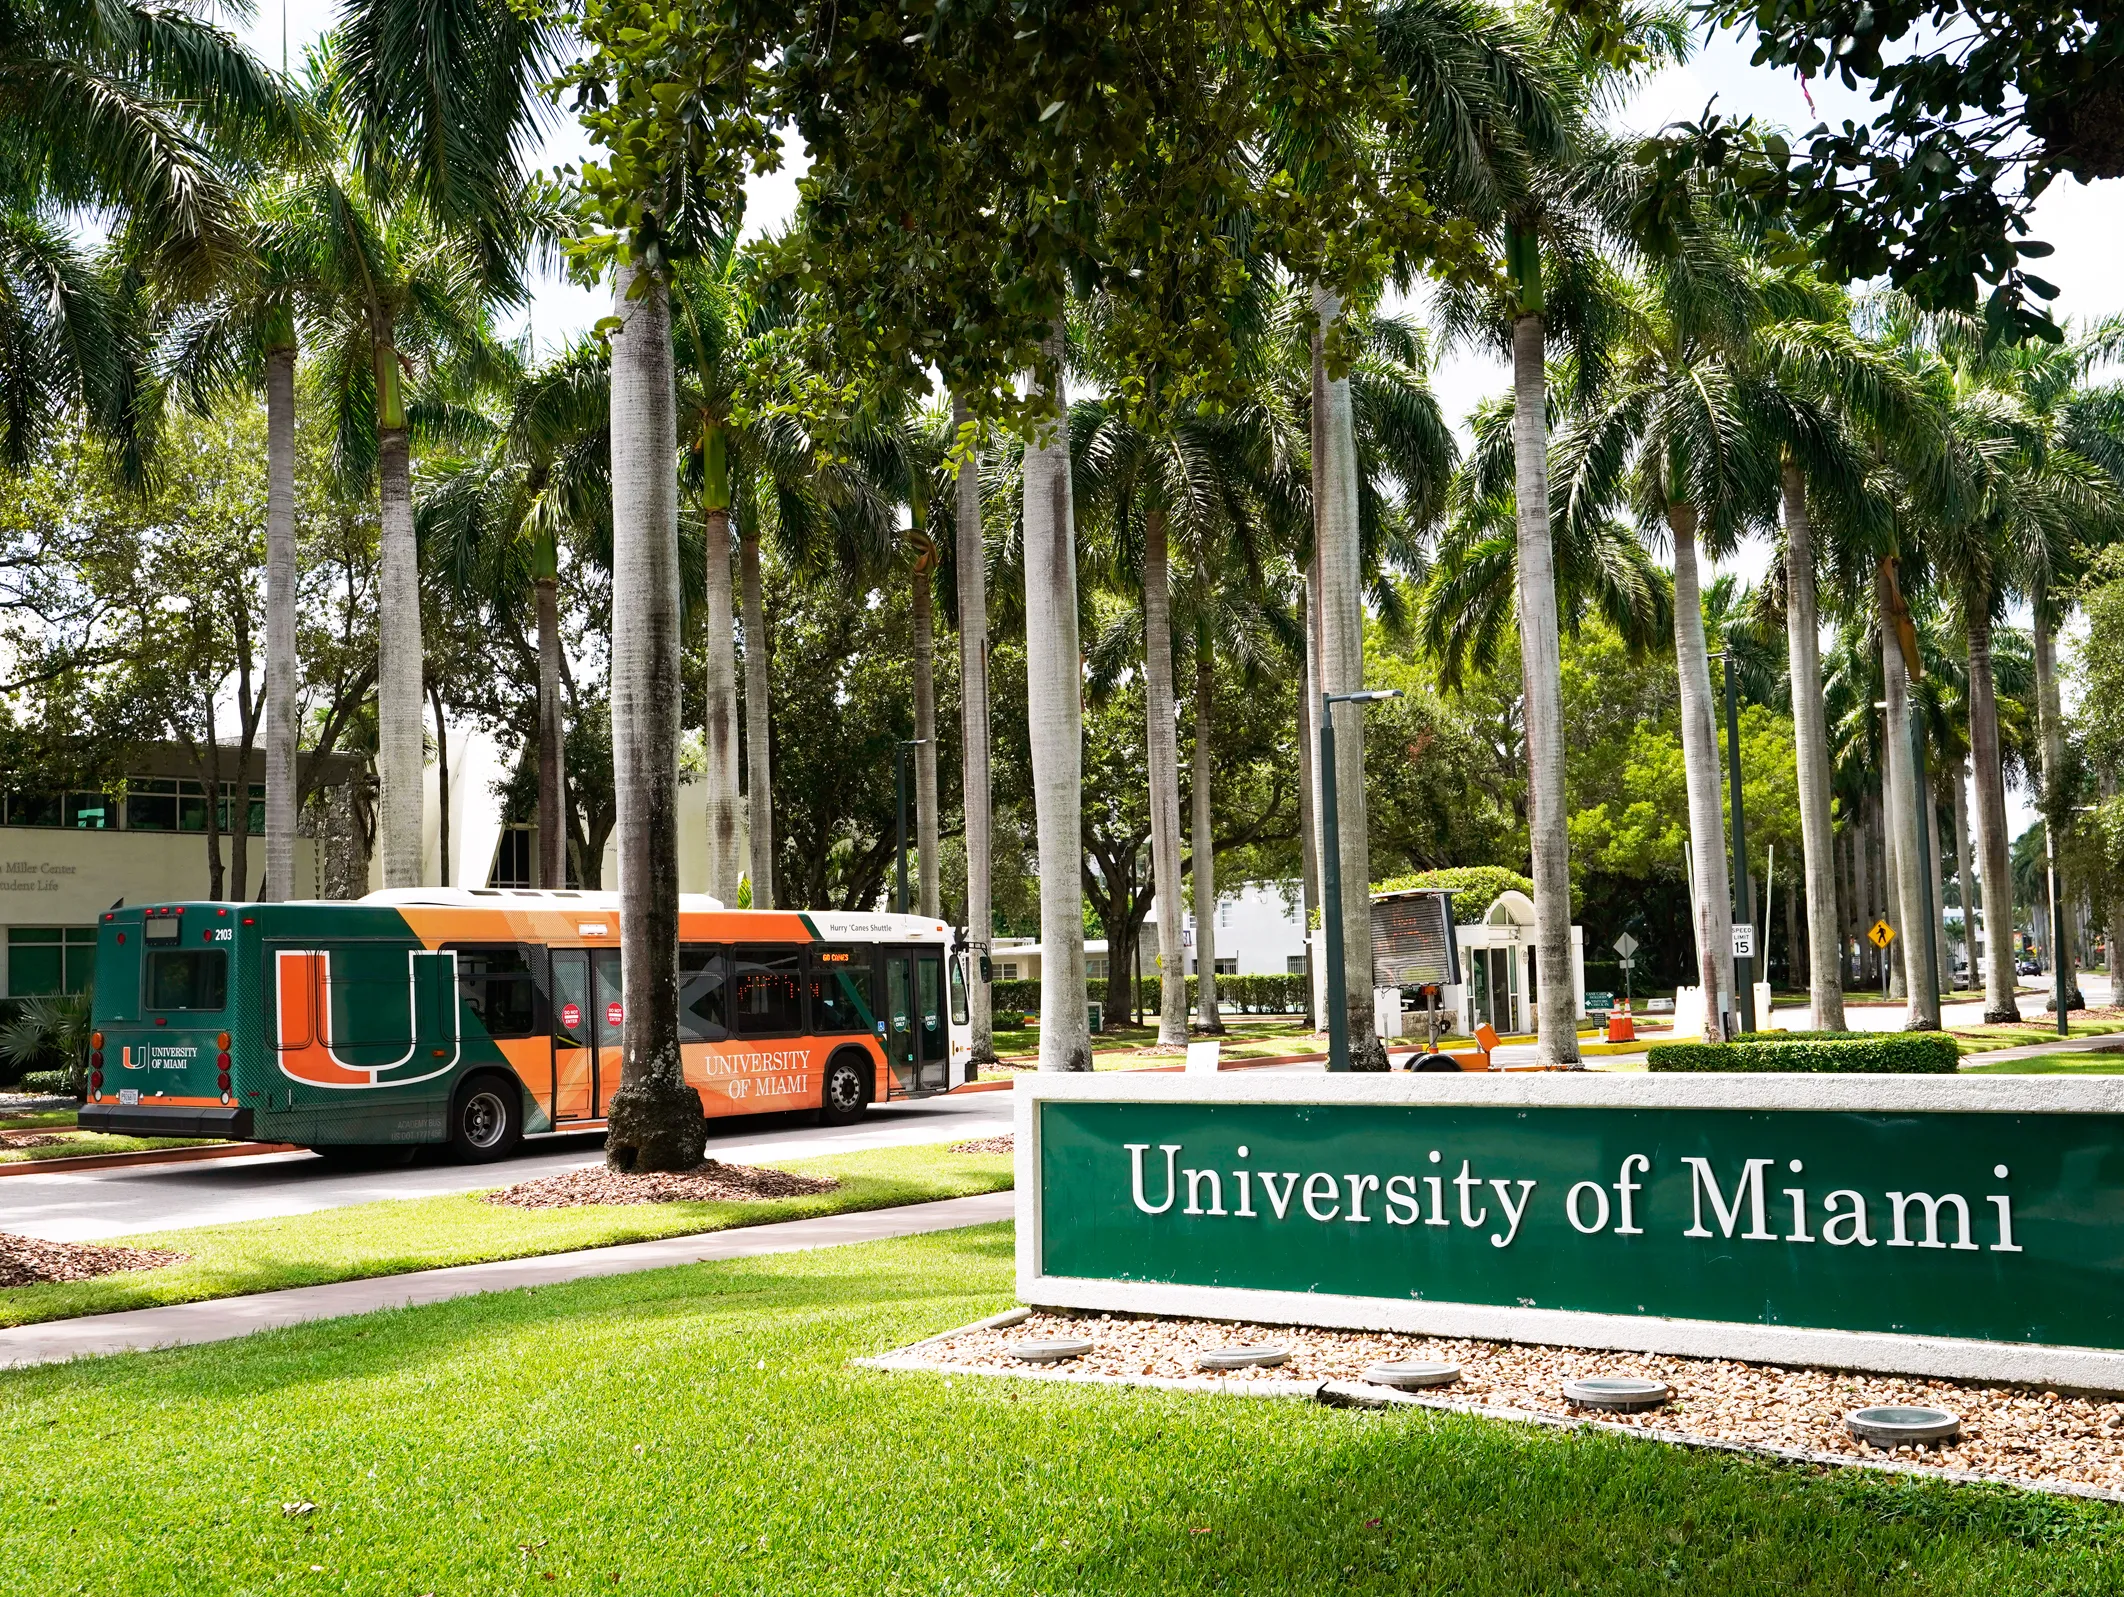 Pursue your studies in USA. Good news! University of Miami Stamps Scholarship is currently open. In this article, we will explain in detail this scholarship, its benefits and the step-by-step application process.